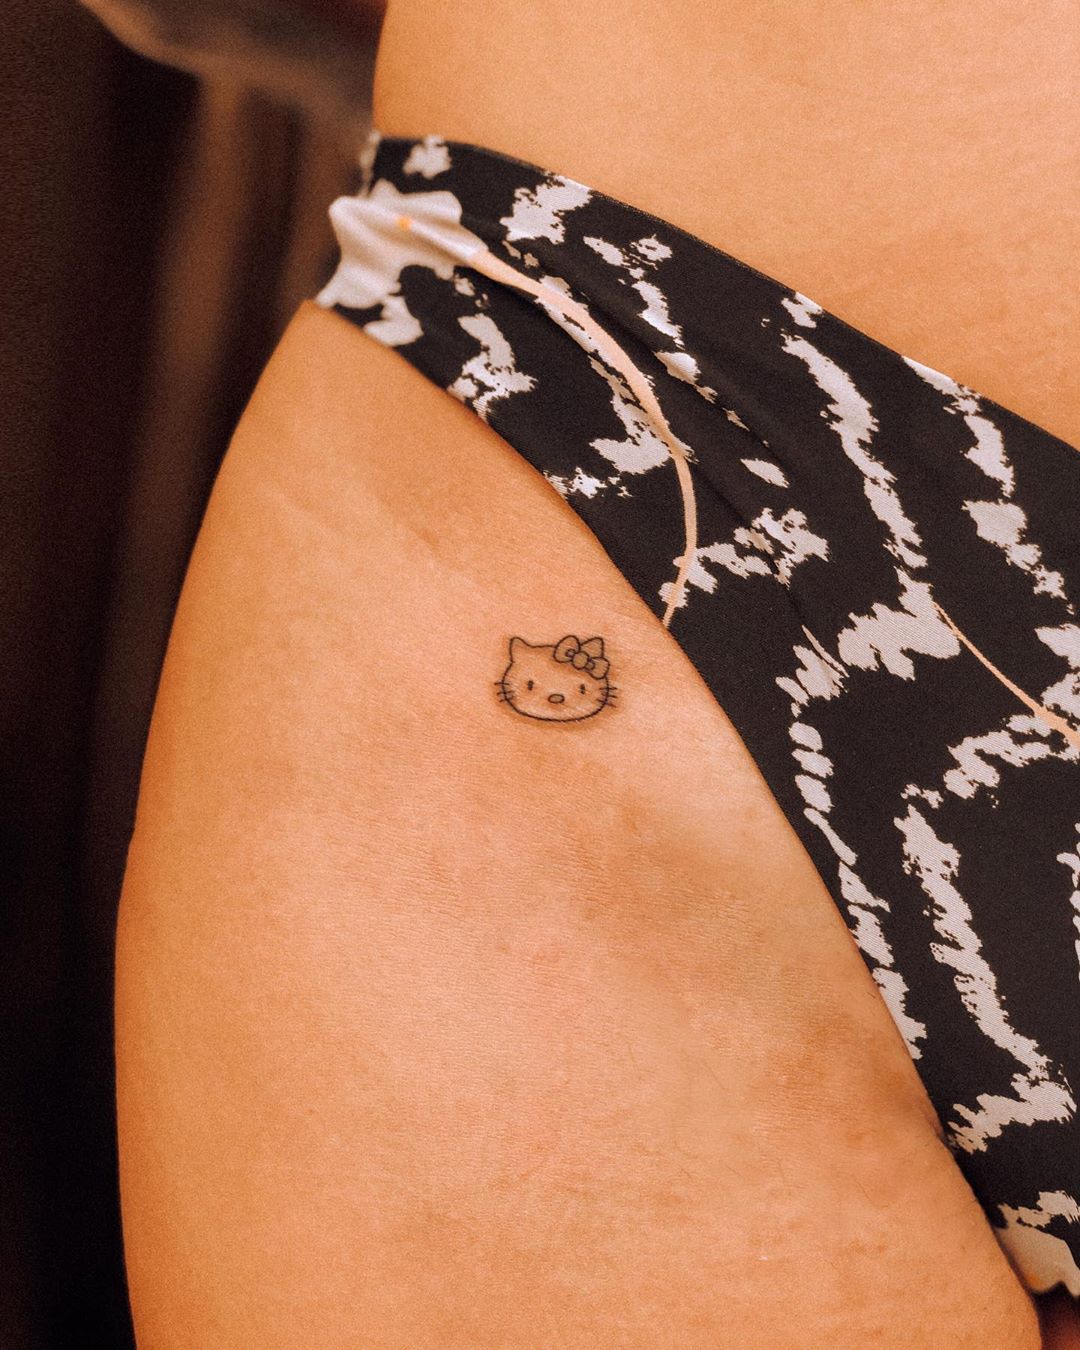 These 100 Hidden Tattoos Ideas Will Satisfy Your Craving For New Ink in ...